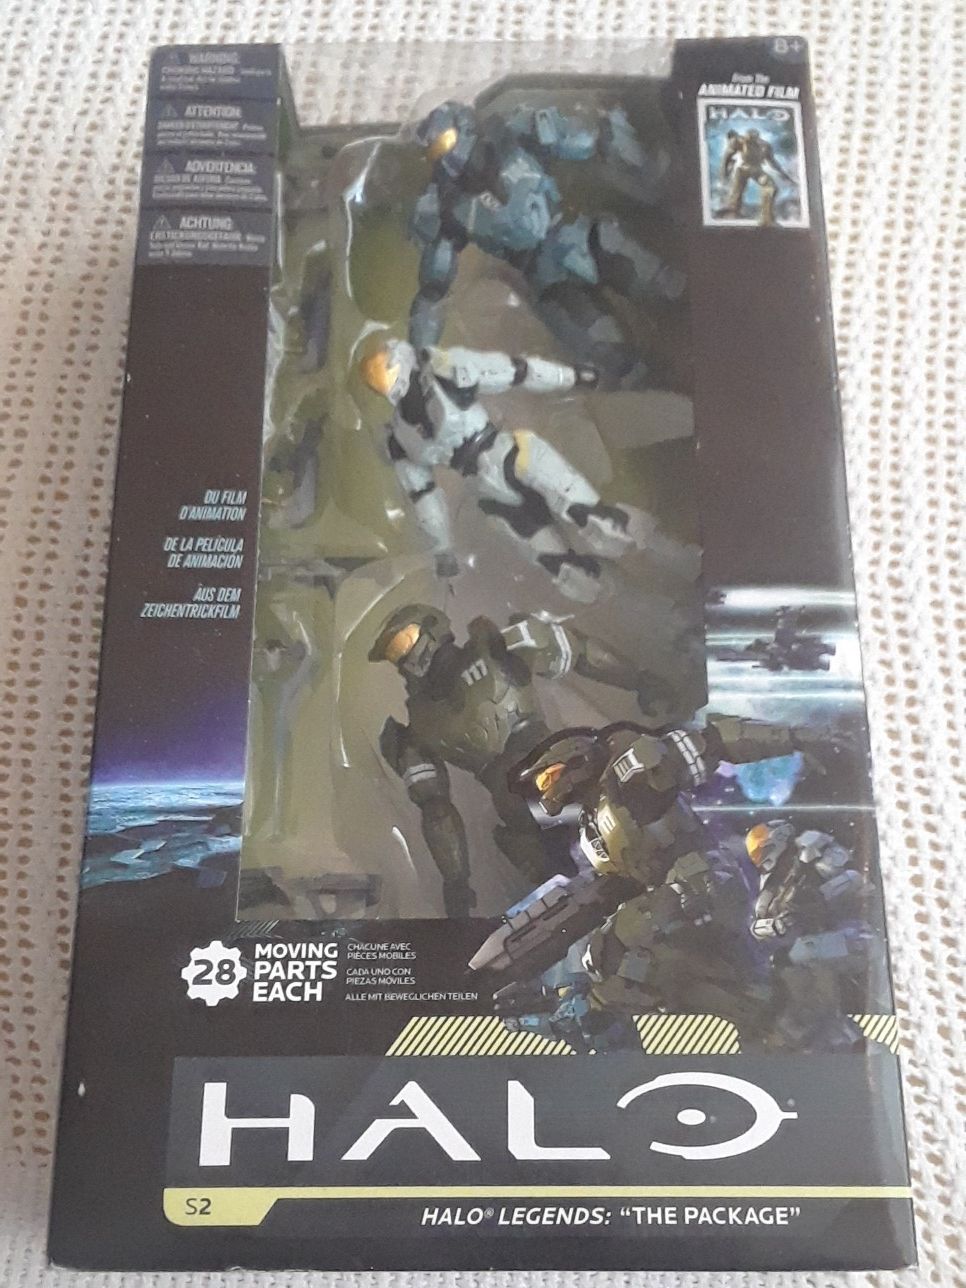 McFarlane Toys Series 2 Halo Legends: The Package Action Figure 3-PackMcFarlane Toys Series 2 Halo Legends: The Package Action Figure 3-Pack